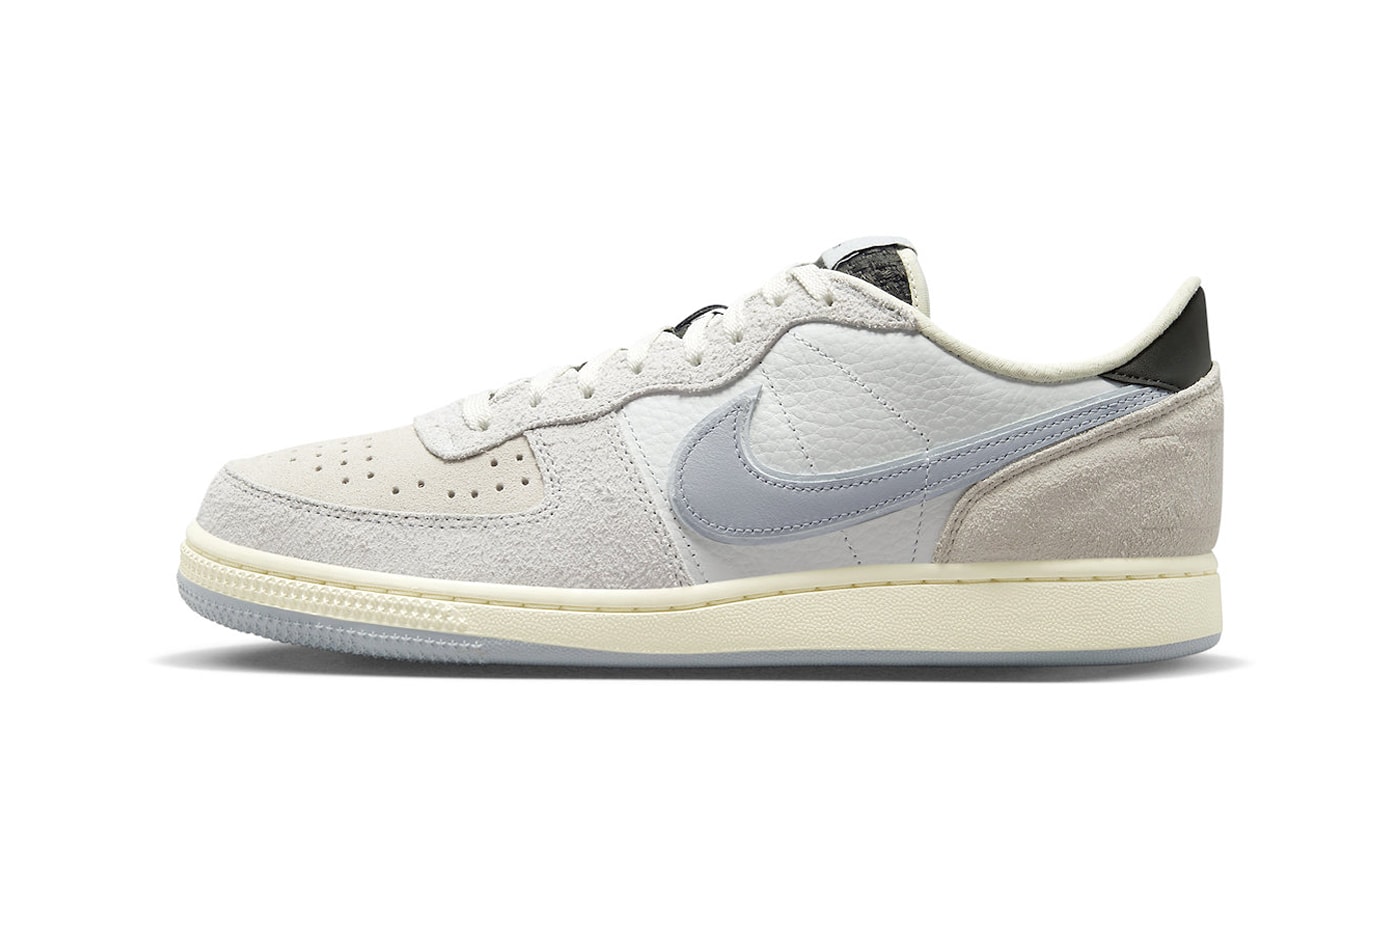 Official Look at the Nike Terminator Low "Liberté" FJ4207-001 Phantom/Wolf Grey-Coconut Milk suede leather summer staple white shoes af1 alternatives air force 1 low swoosh